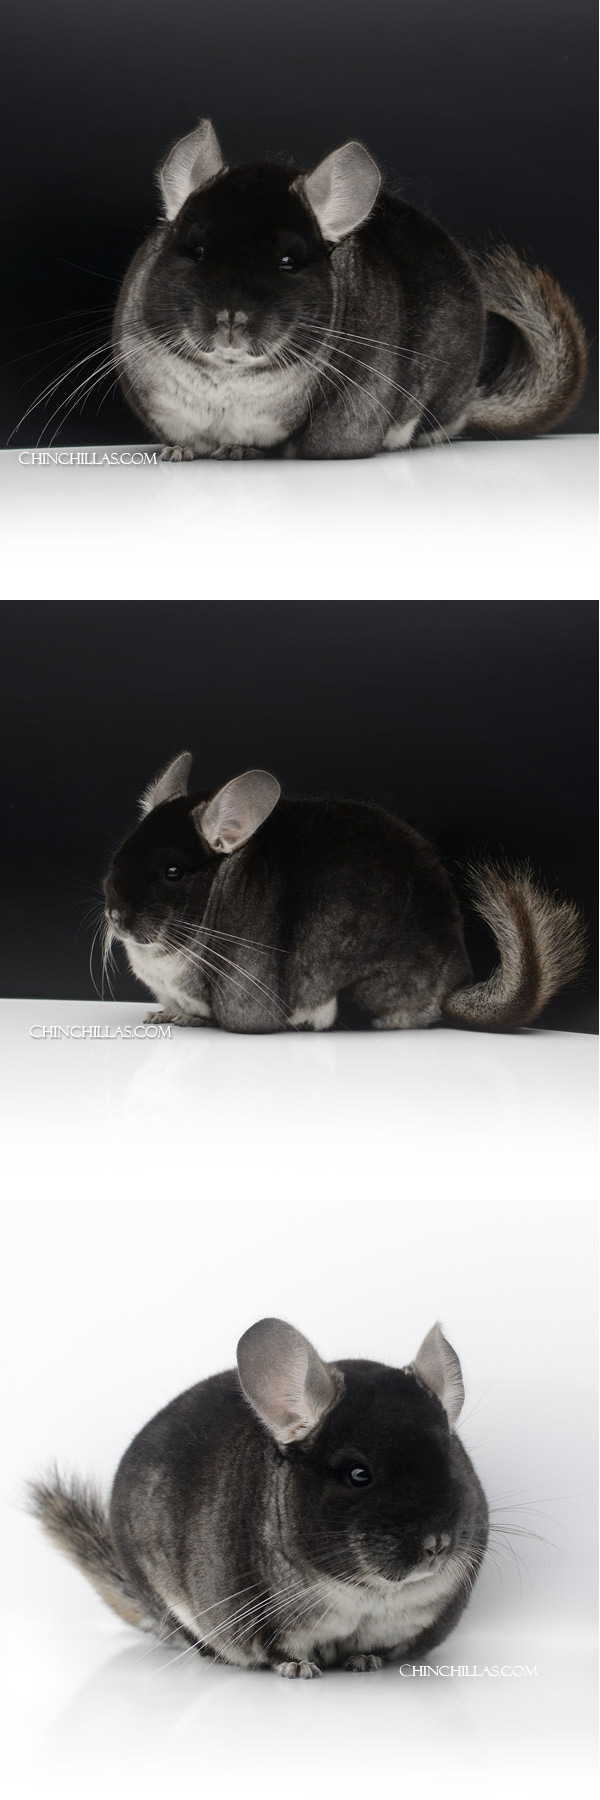 Chinchilla or related item offered for sale or export on Chinchillas.com - 23162 Large Show Quality Black Velvet Male Chinchilla